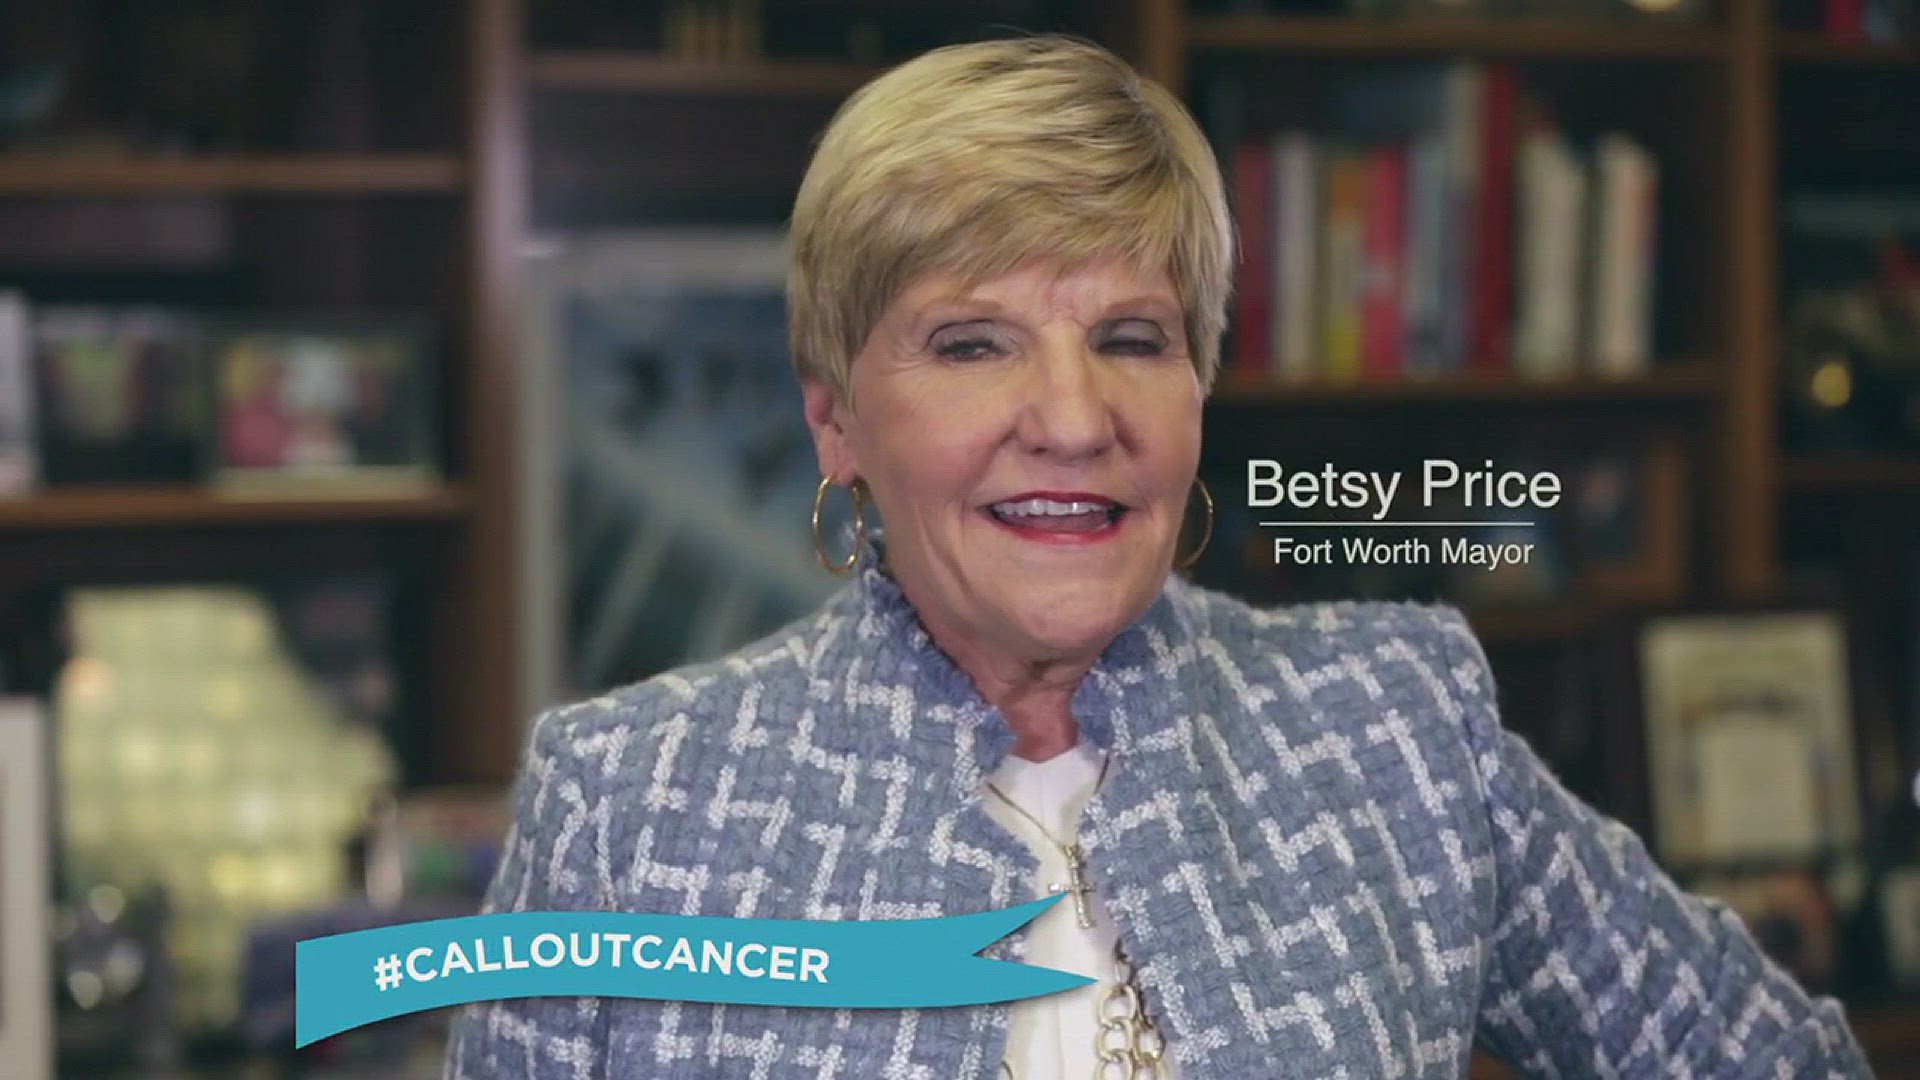 Fort Worth Mayor Betsy Price is Calling Out Cancer.